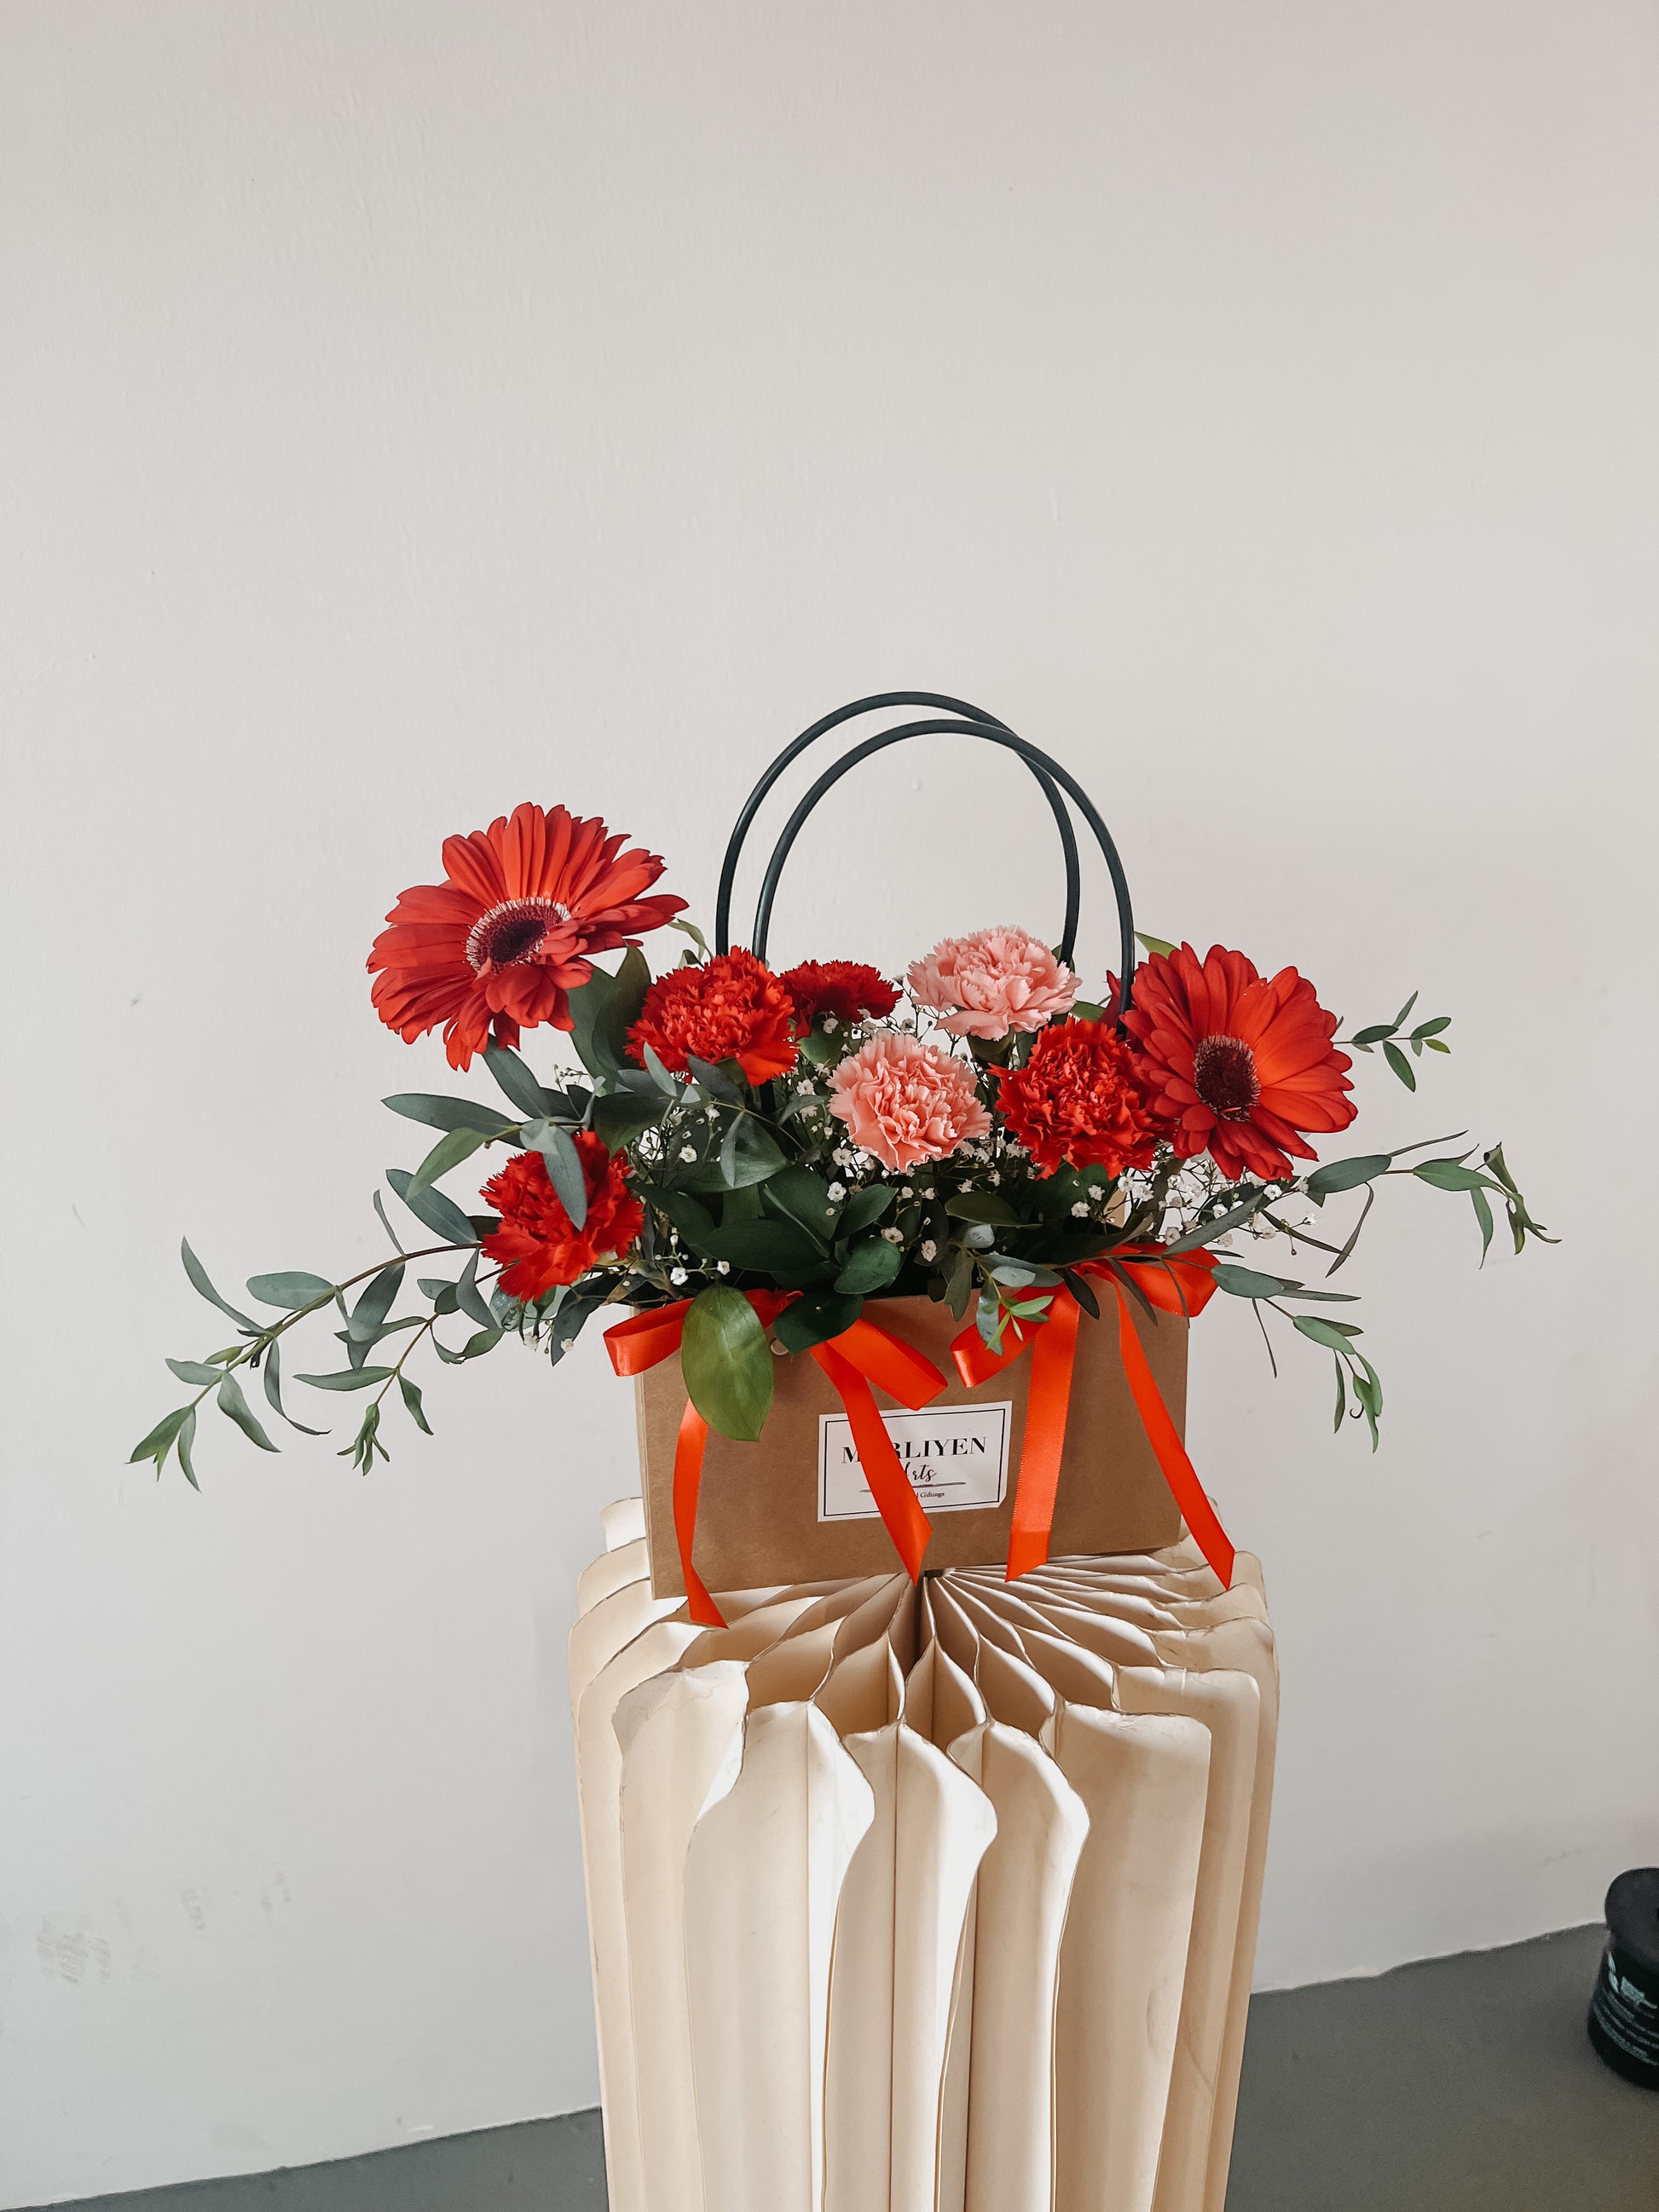 Any Day FloristPerfect gift for all the mommys out there as this bloom bag consists of carnations and gebera! Perfect gift for new mothers, motherly figure in your life. Show them A Mother's Love | Bloom Bag Arrangement